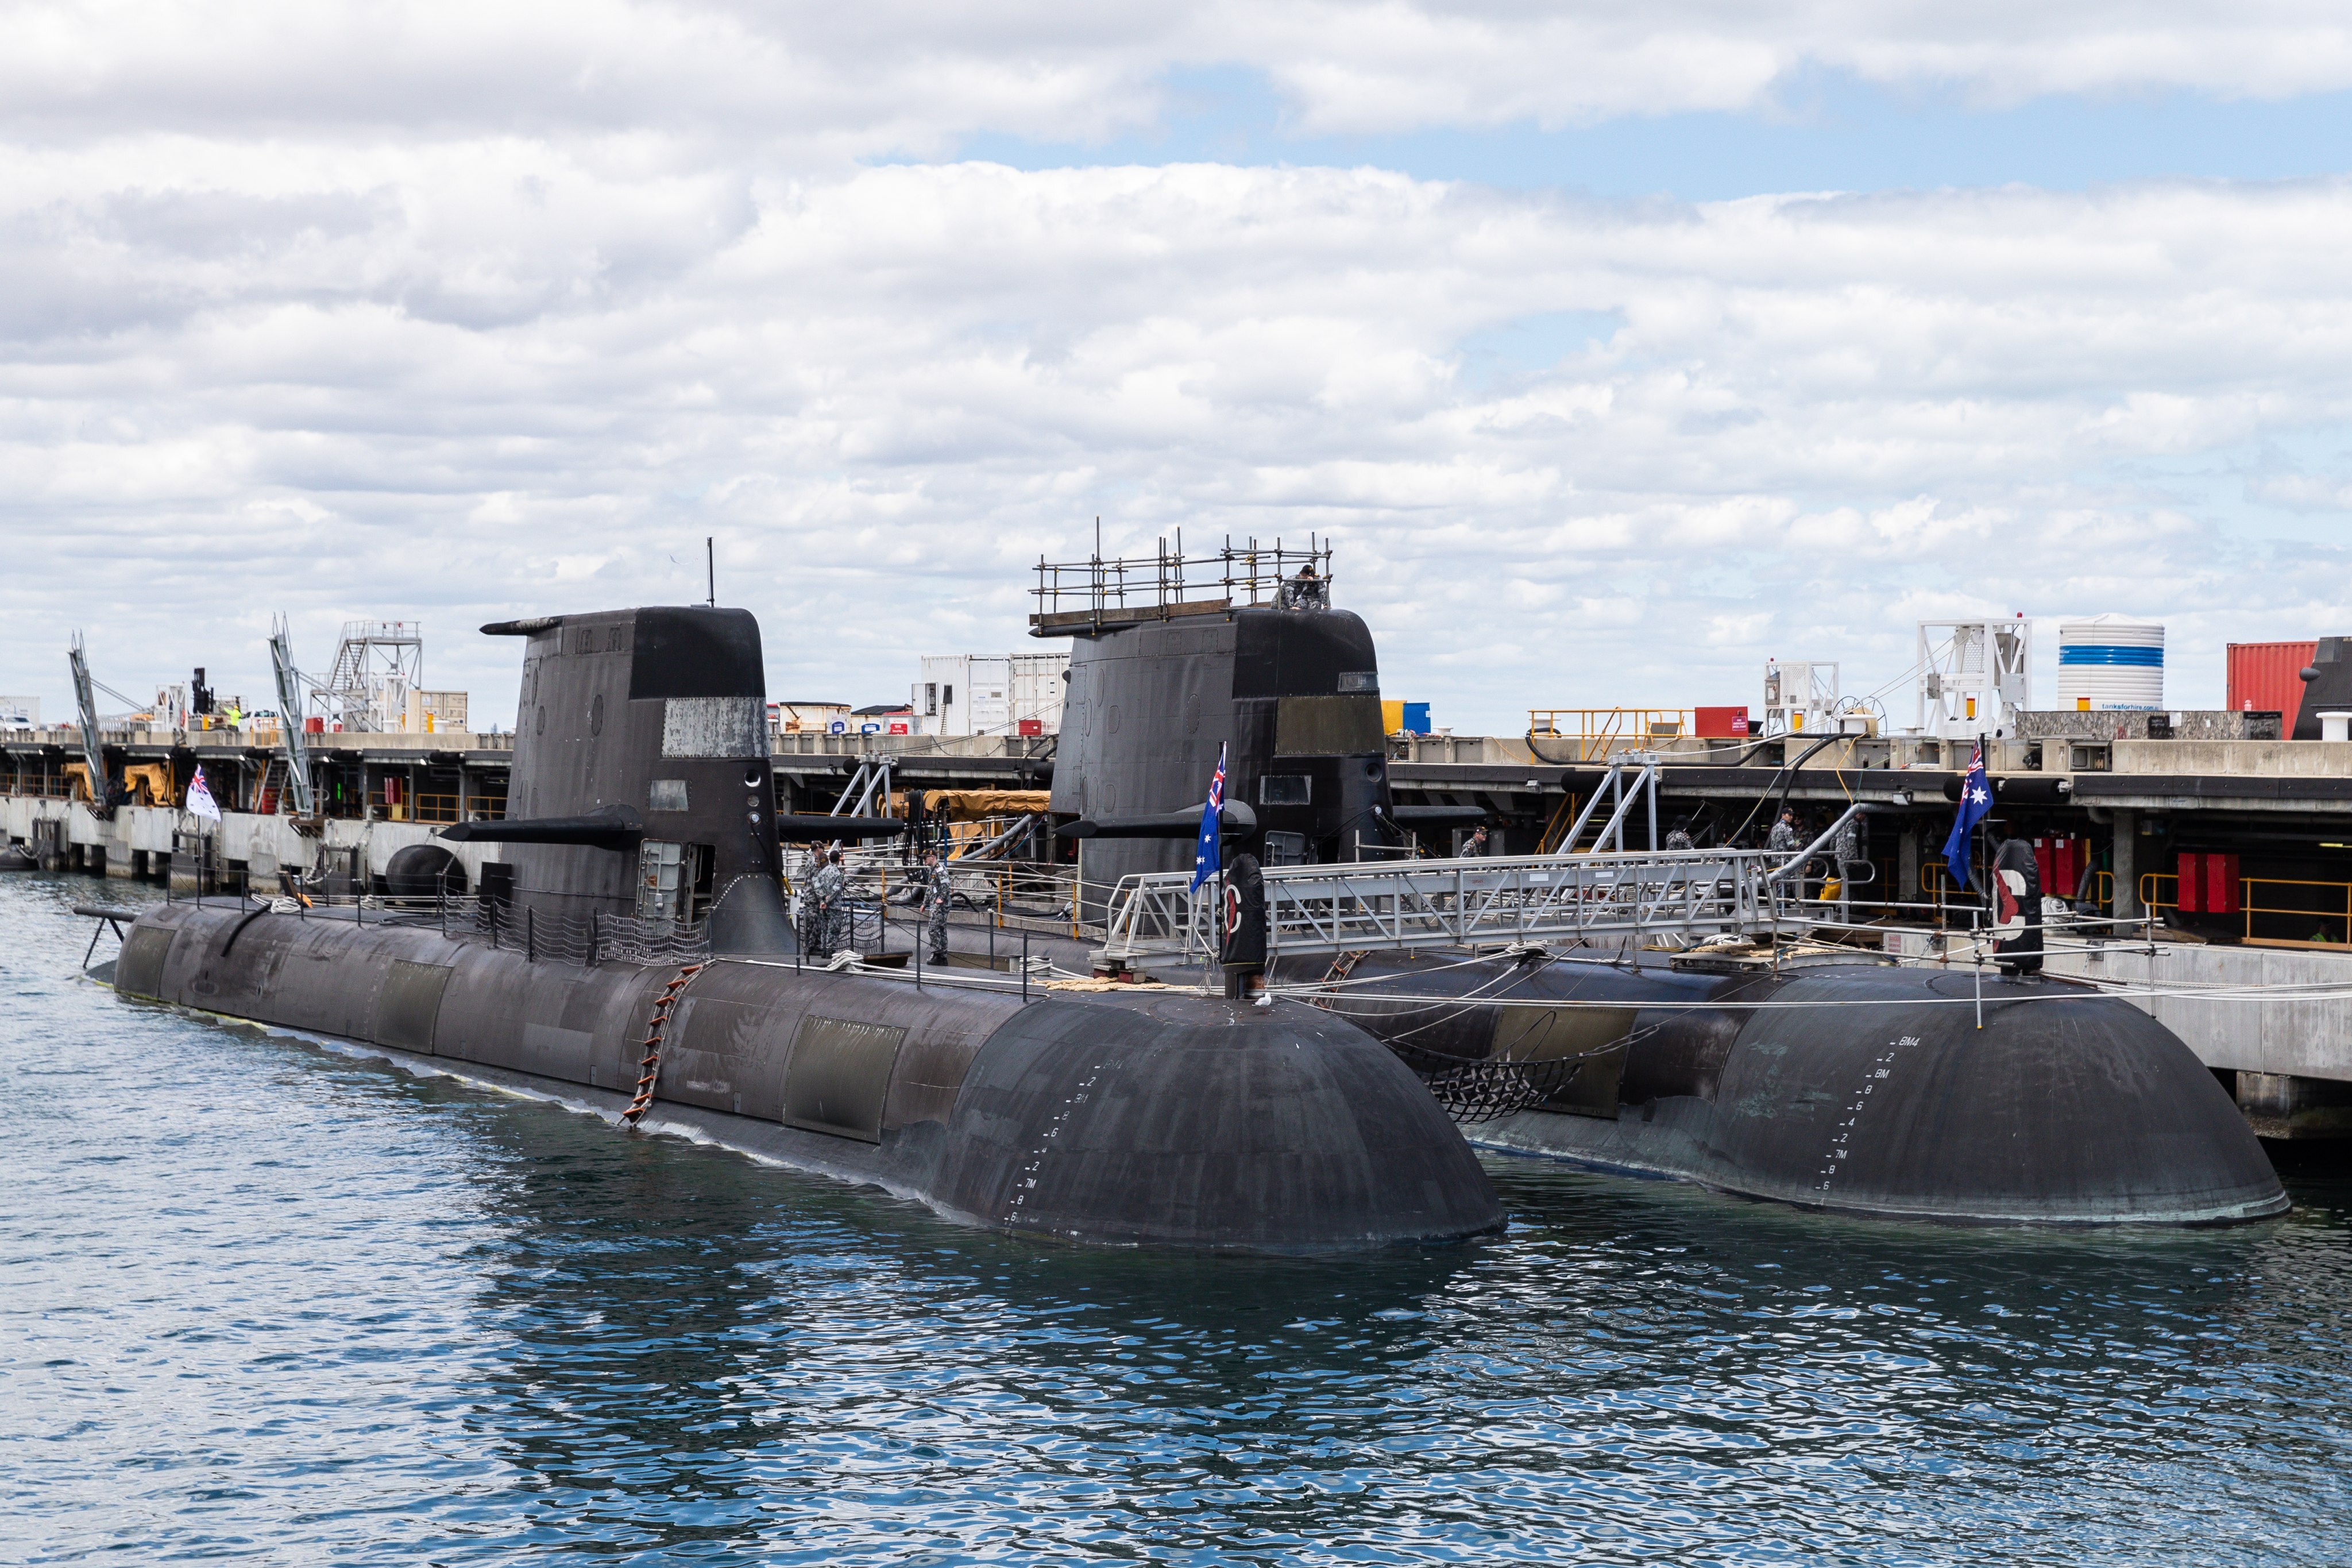 Two Australian Collins class submarines are docked at HMAS Stirling Royal Australian Navy base in Perth, Western Australia, on October 29. Australia is committed to getting its first nuclear-powered submarines built and operating as quickly as possible, Defence Minister Peter Dutton has said. Photo: EPA-EFE